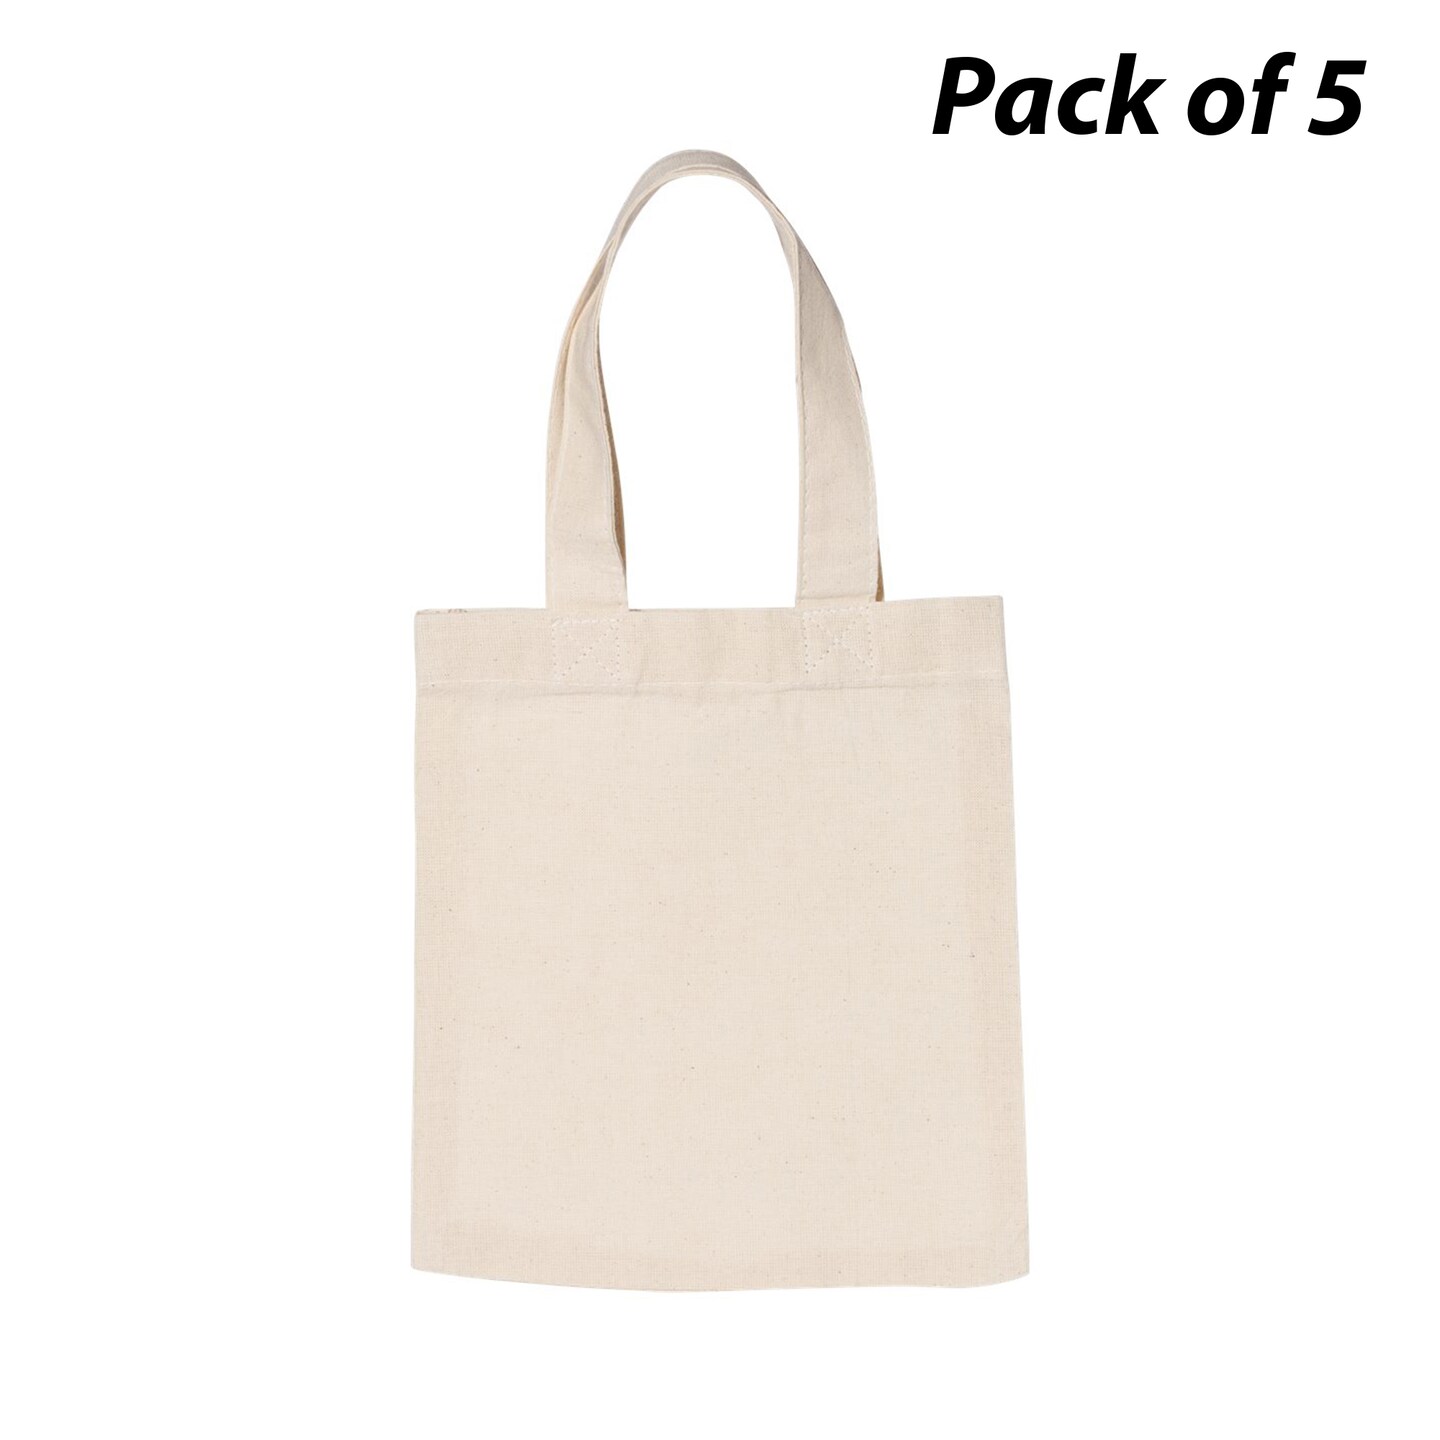 OAD&#xAE; - Small Canvas Tote - OAD115 | 6 oz./lyd, 100% cotton canvas